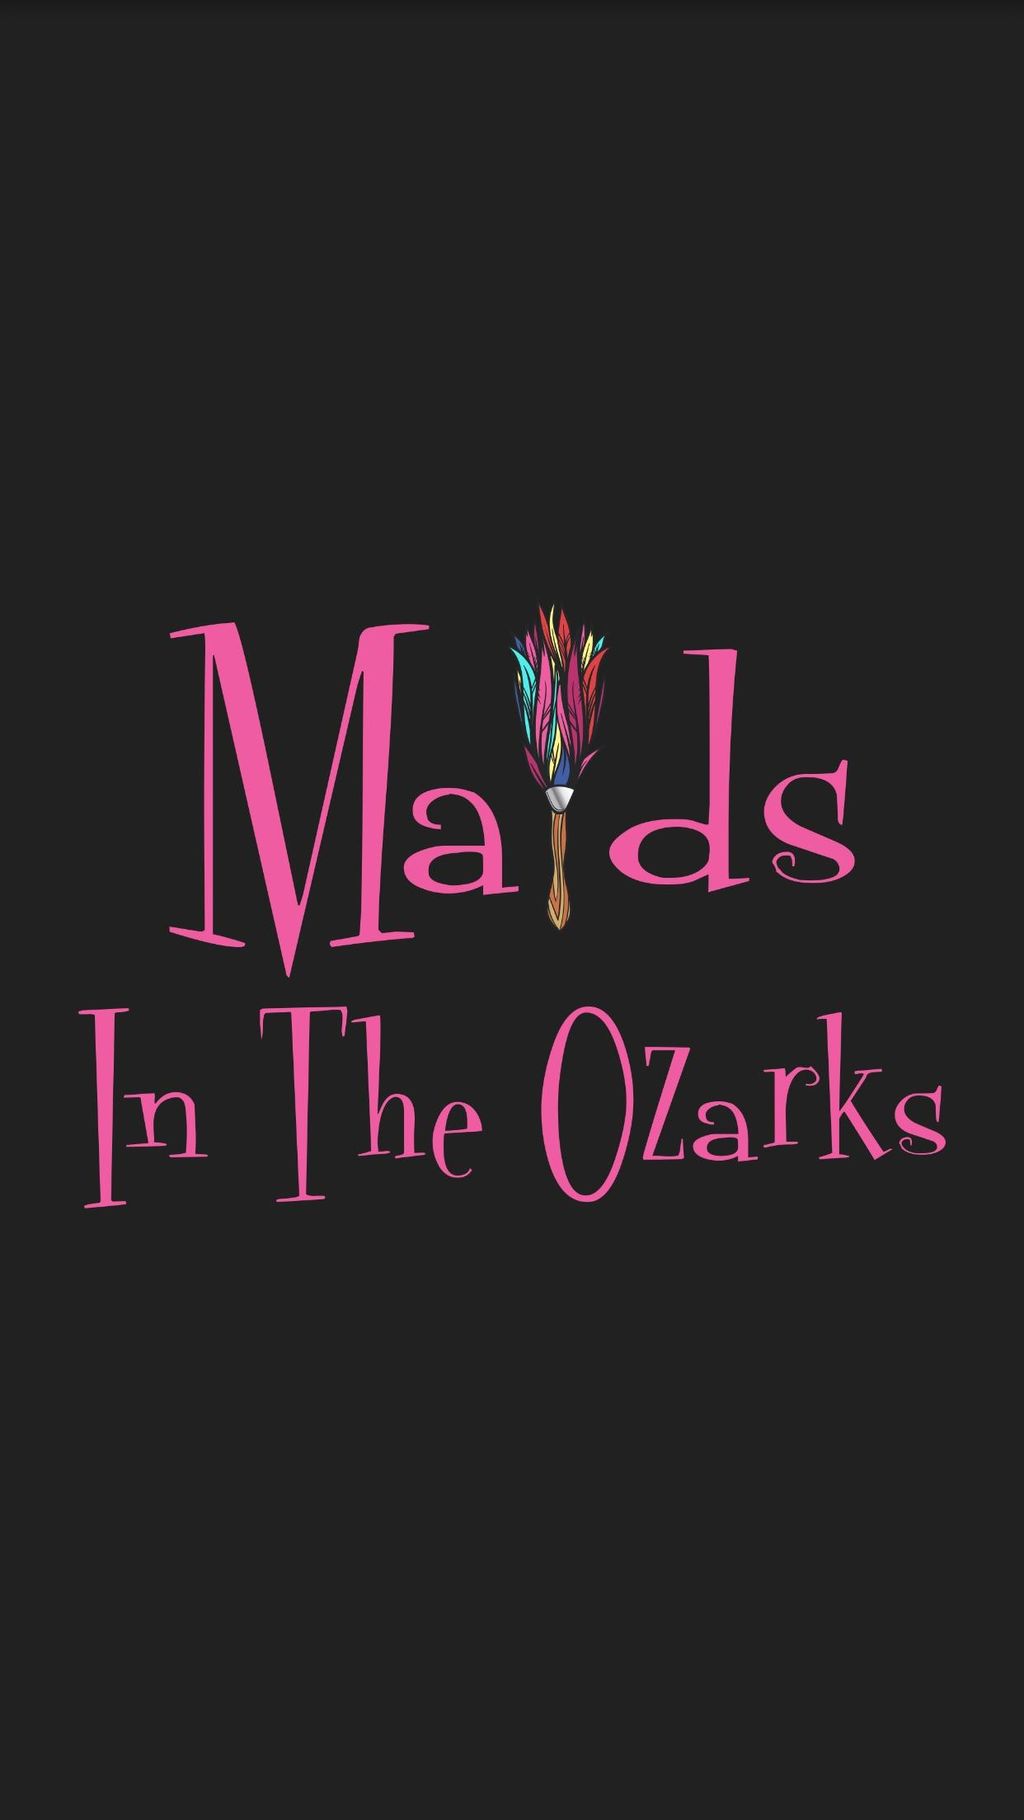 Maids In The Ozarks